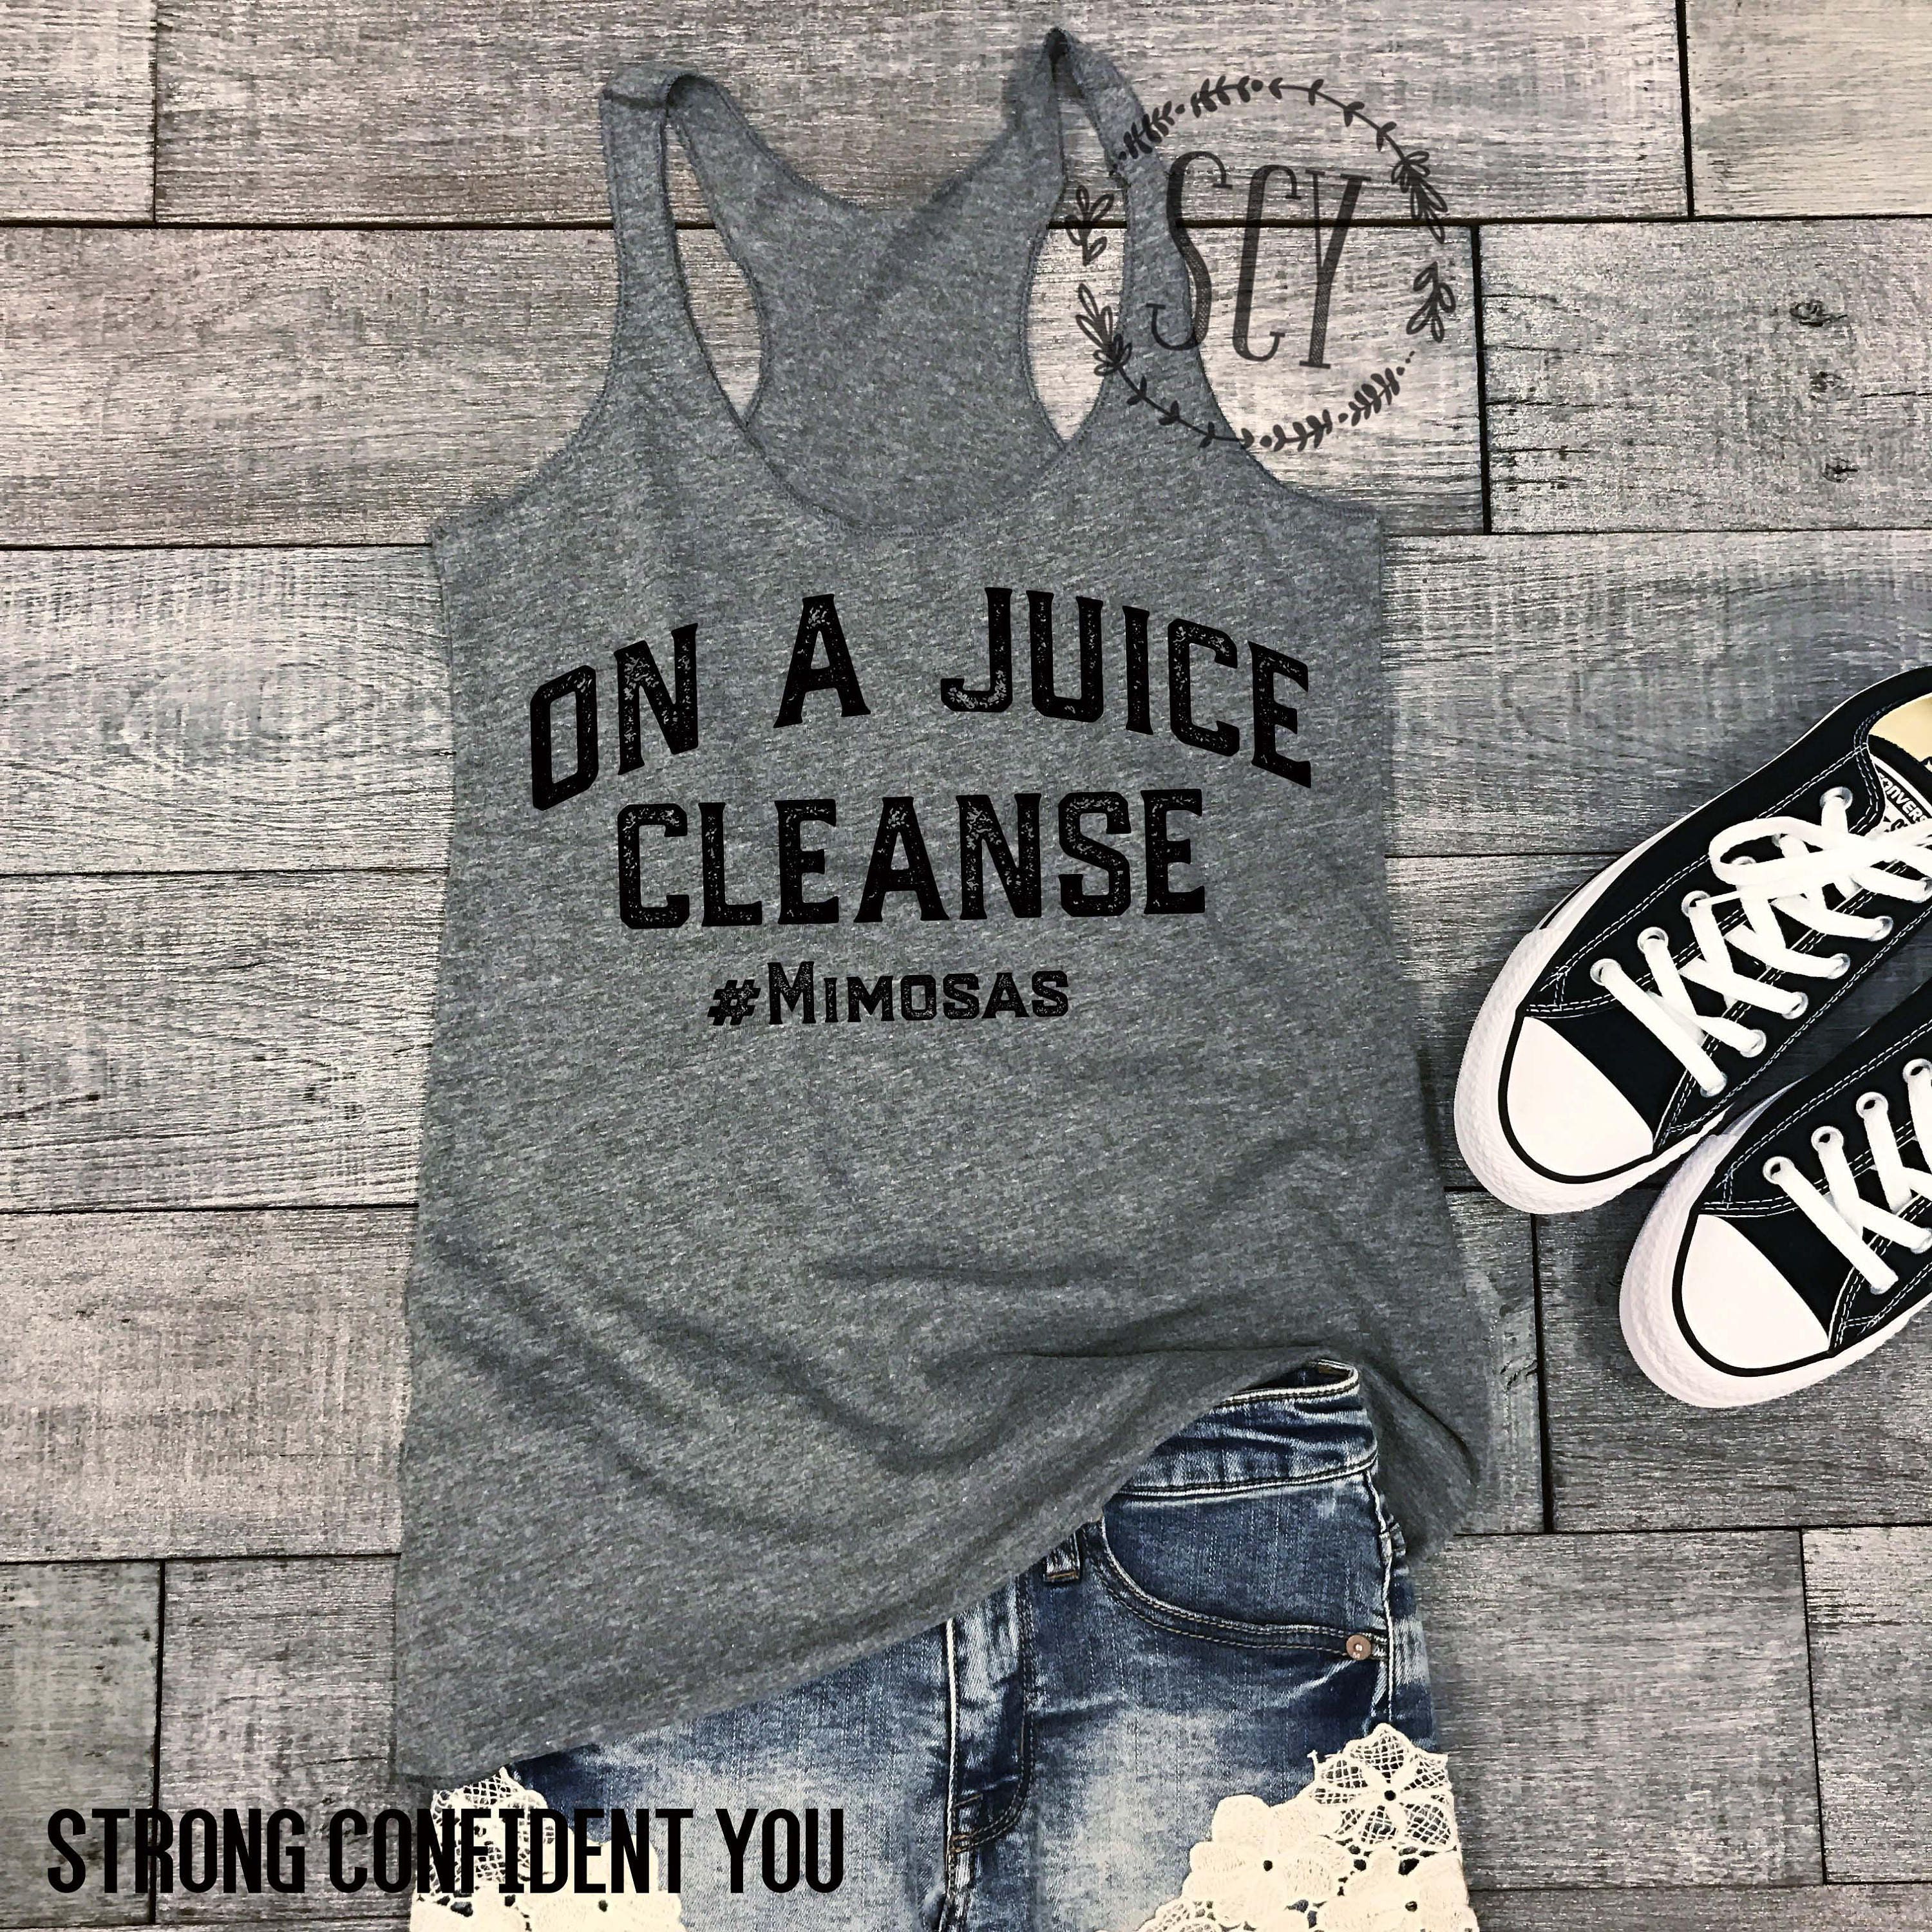 On A Juice Cleanse #Mimosas - Workout Tank - Gym Shirt - Exercise Tee - Yoga Tank - Brunch Shirt - Brunch Tank Top - Funny Graphic Tank